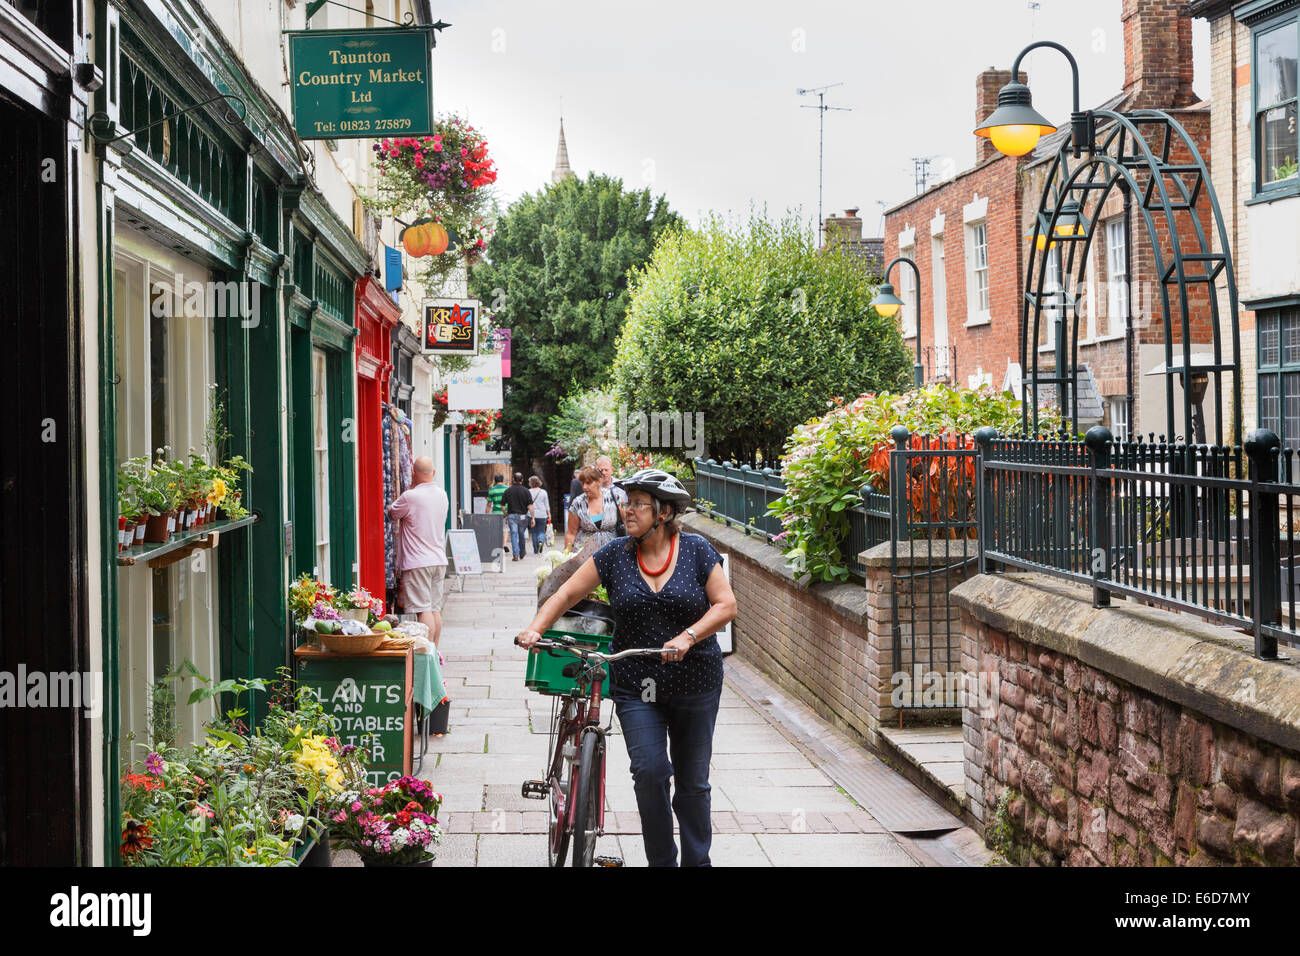 Mature woman pushing her bicycle past shops in Taunton. Stock Photo